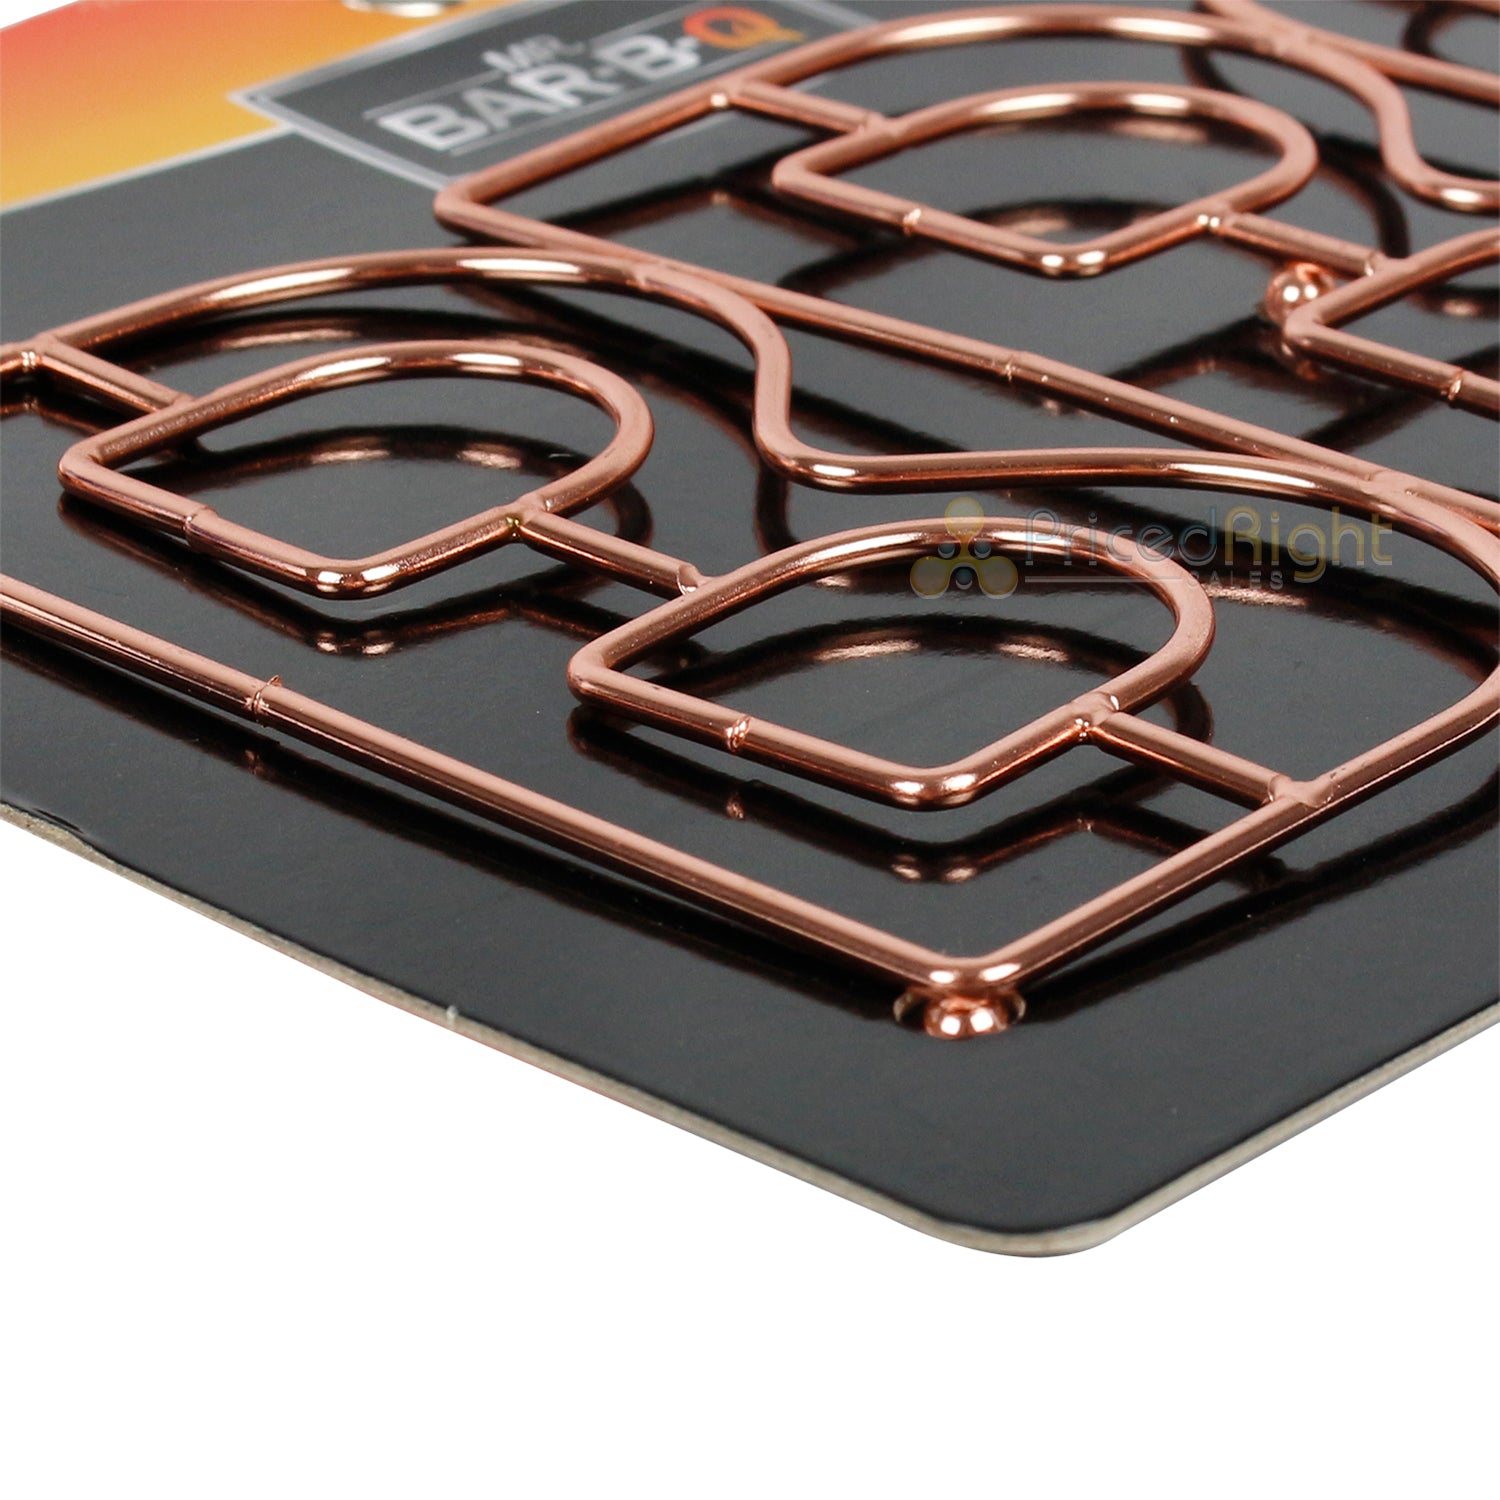 Mr. Bar-B-Q "BBQ" Trivet Metal Rose Gold Finish For Indoor And Outdoor Cooking